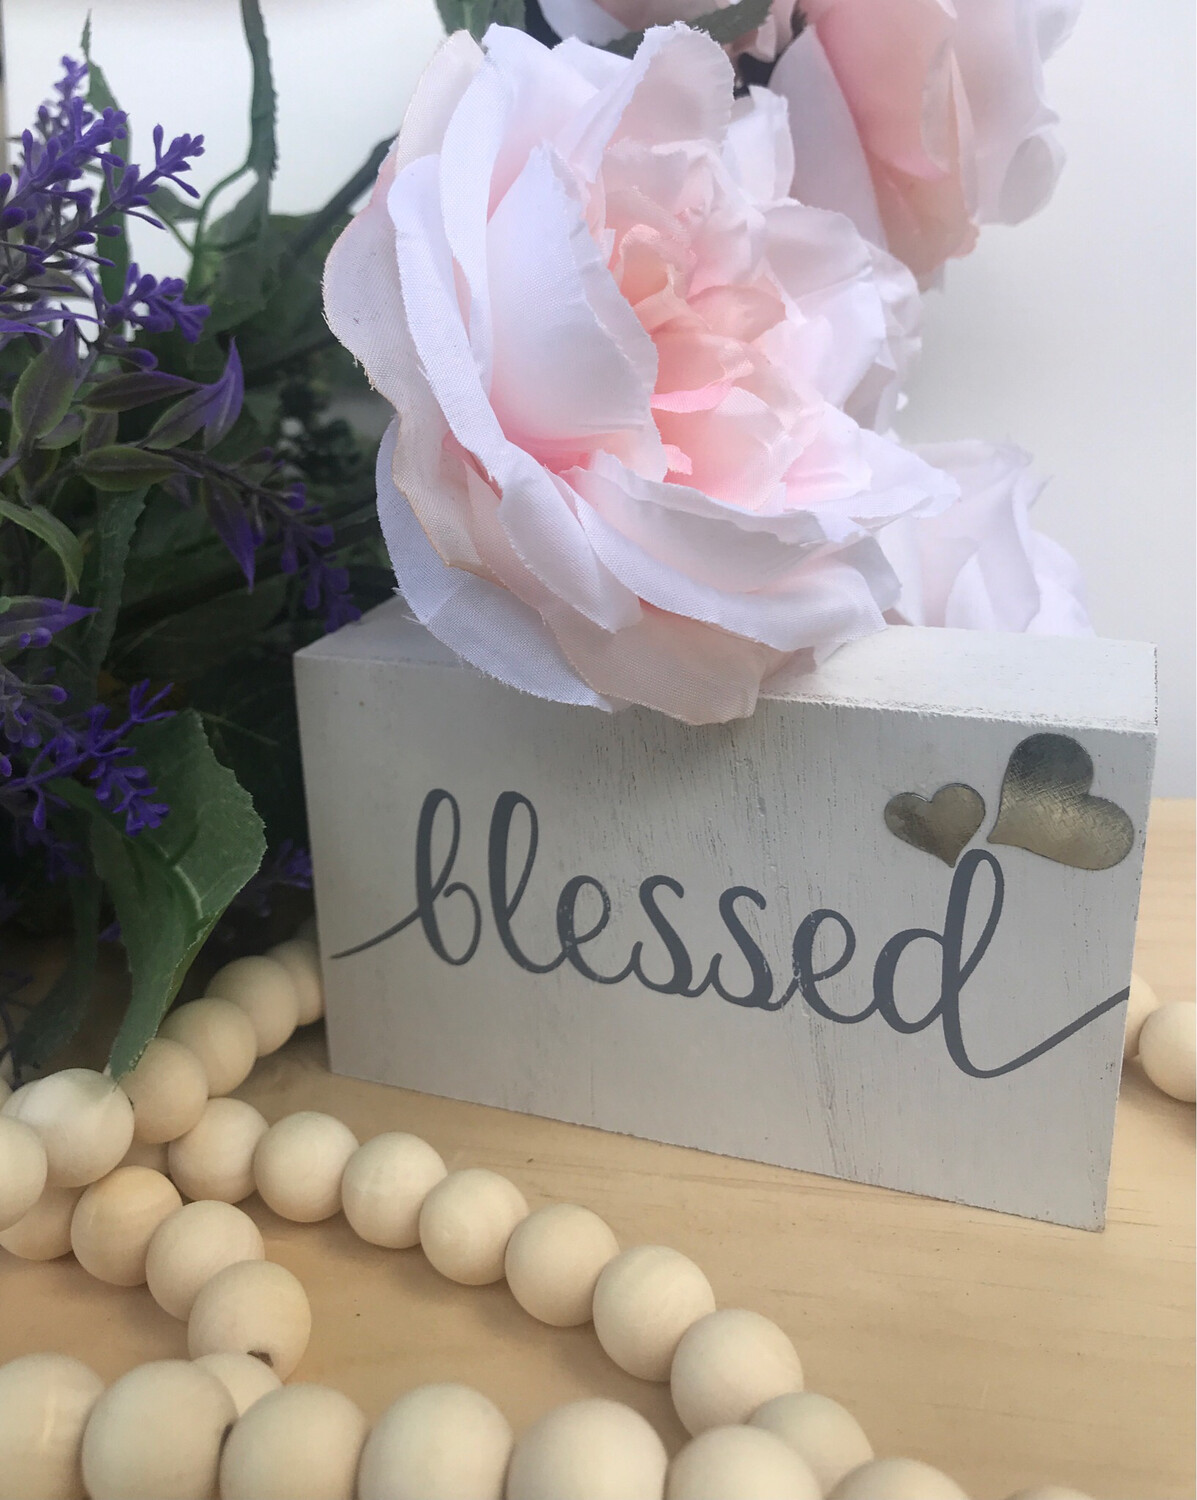 FAMILY-BLESSED-HAPPY-CHOOSE BOX SIGN